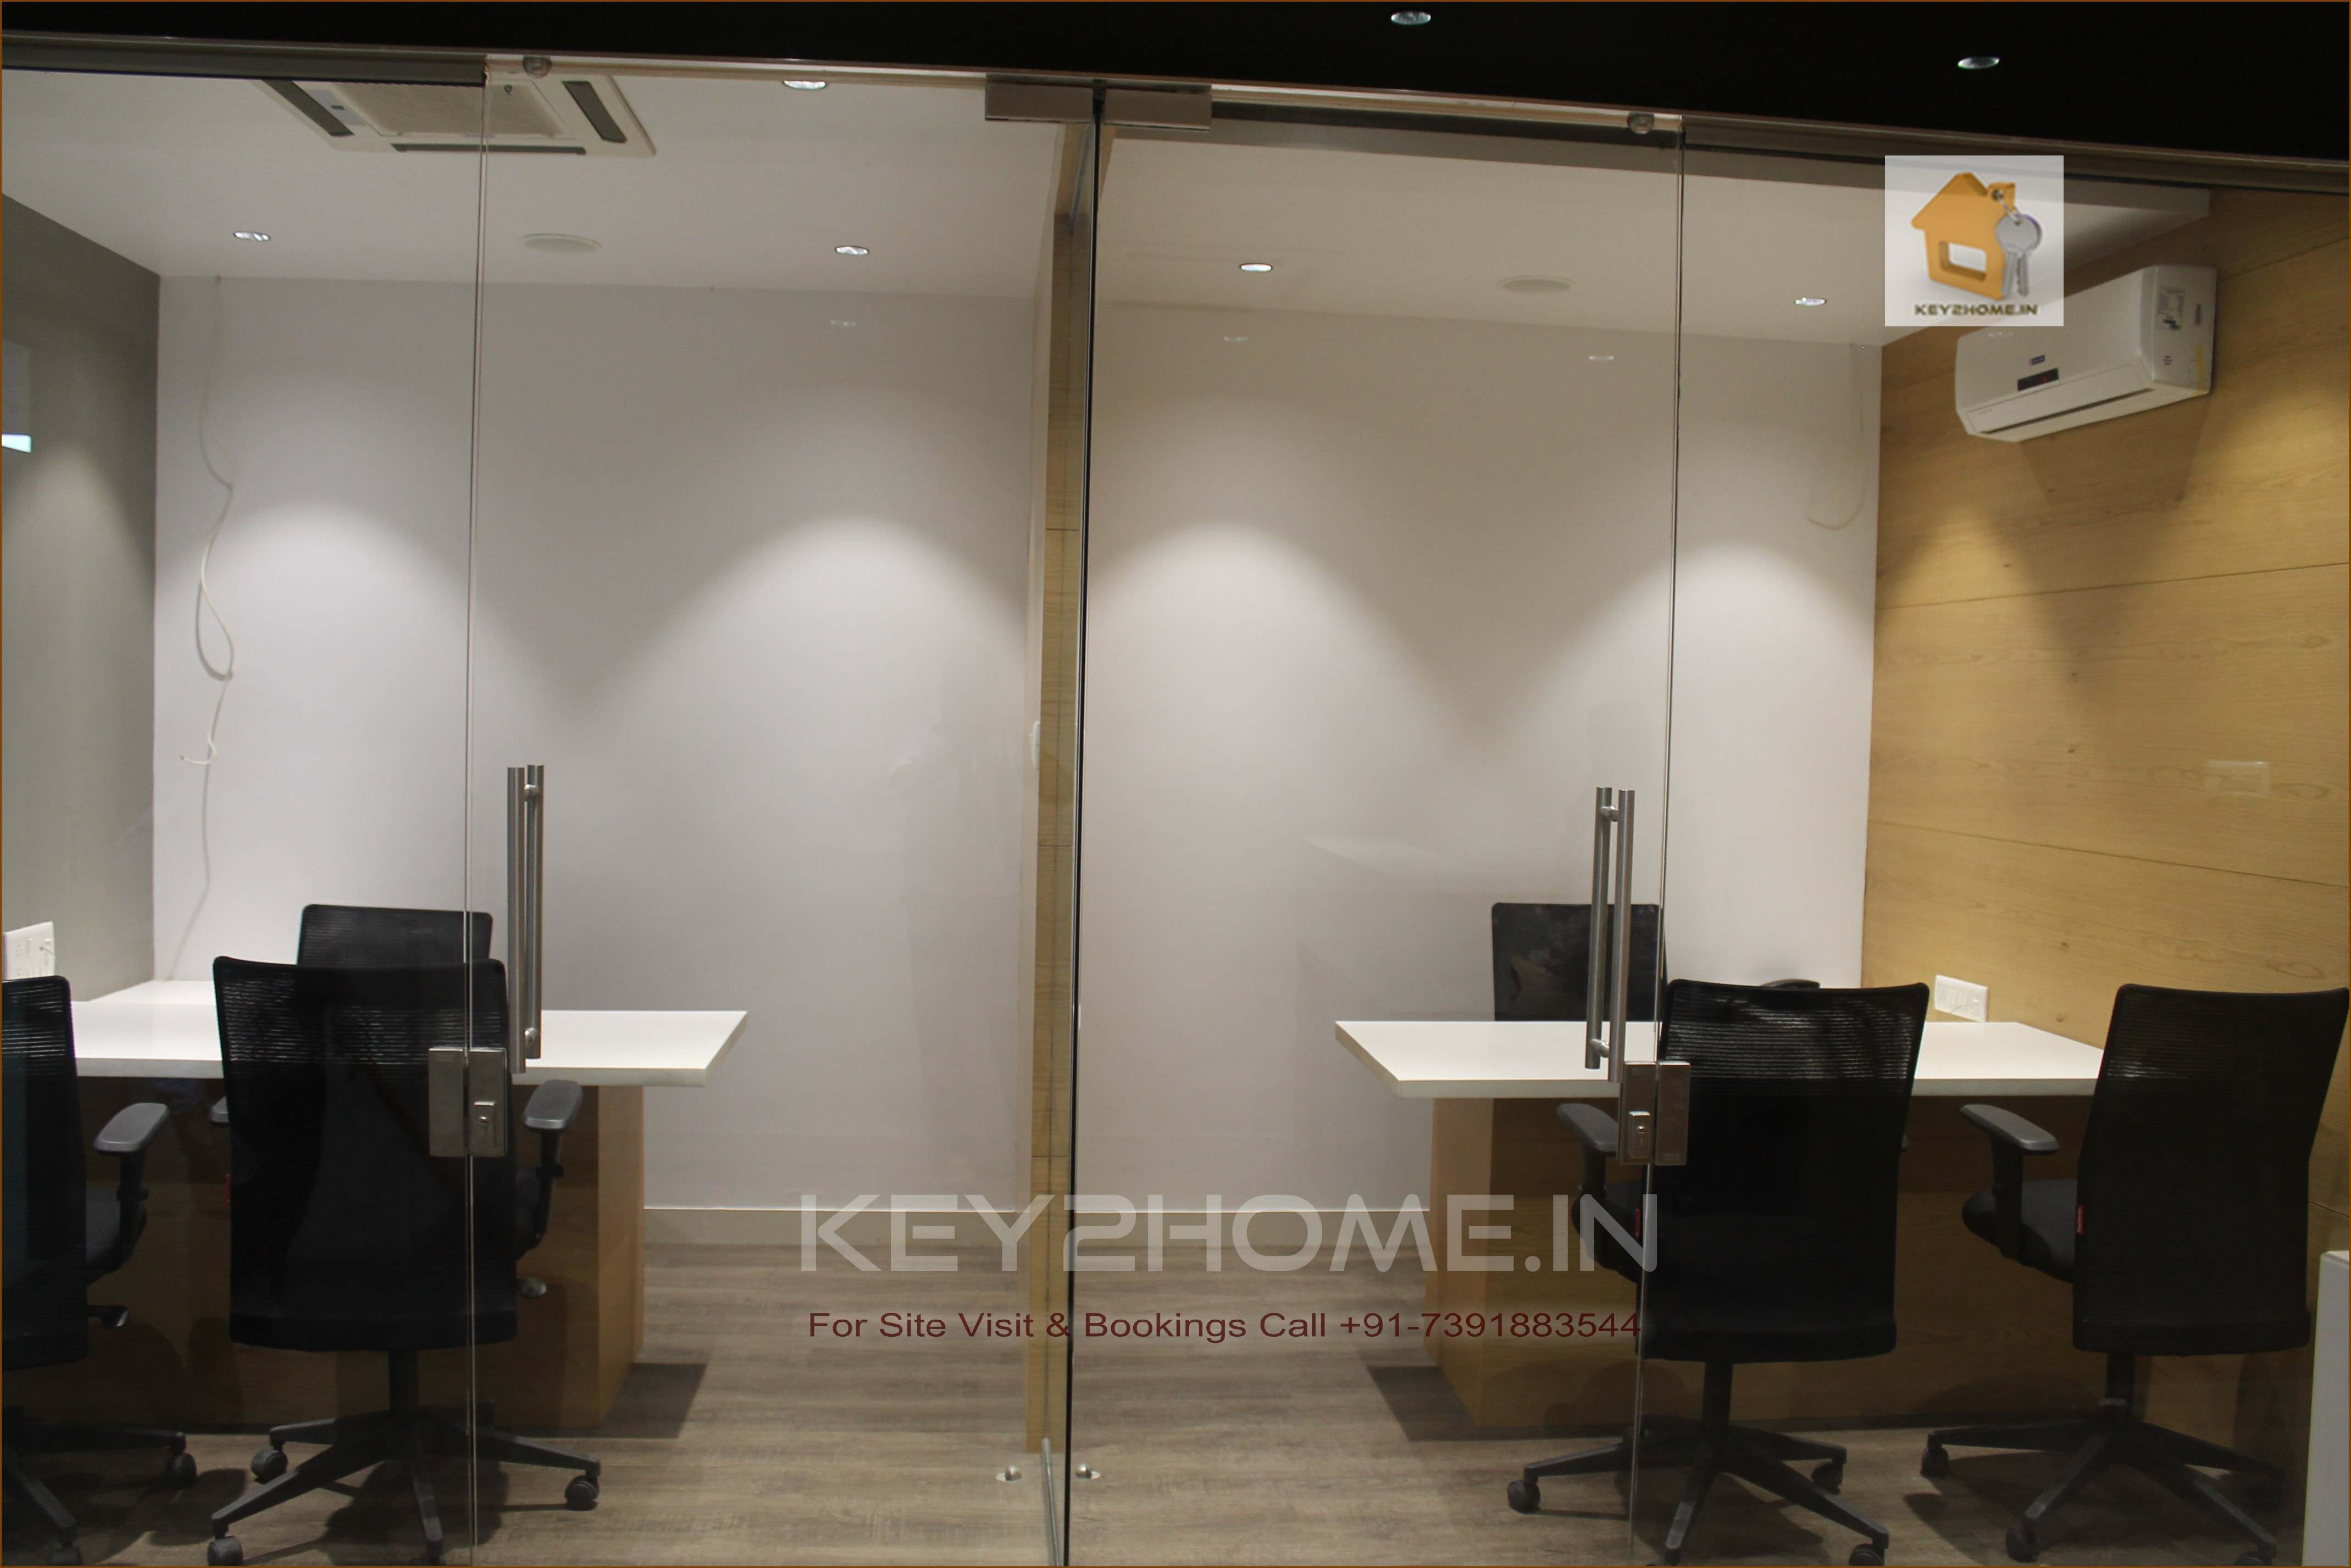 Commercial Office space on rent in Hinjewadi near wakad bridge combined view of single cabins